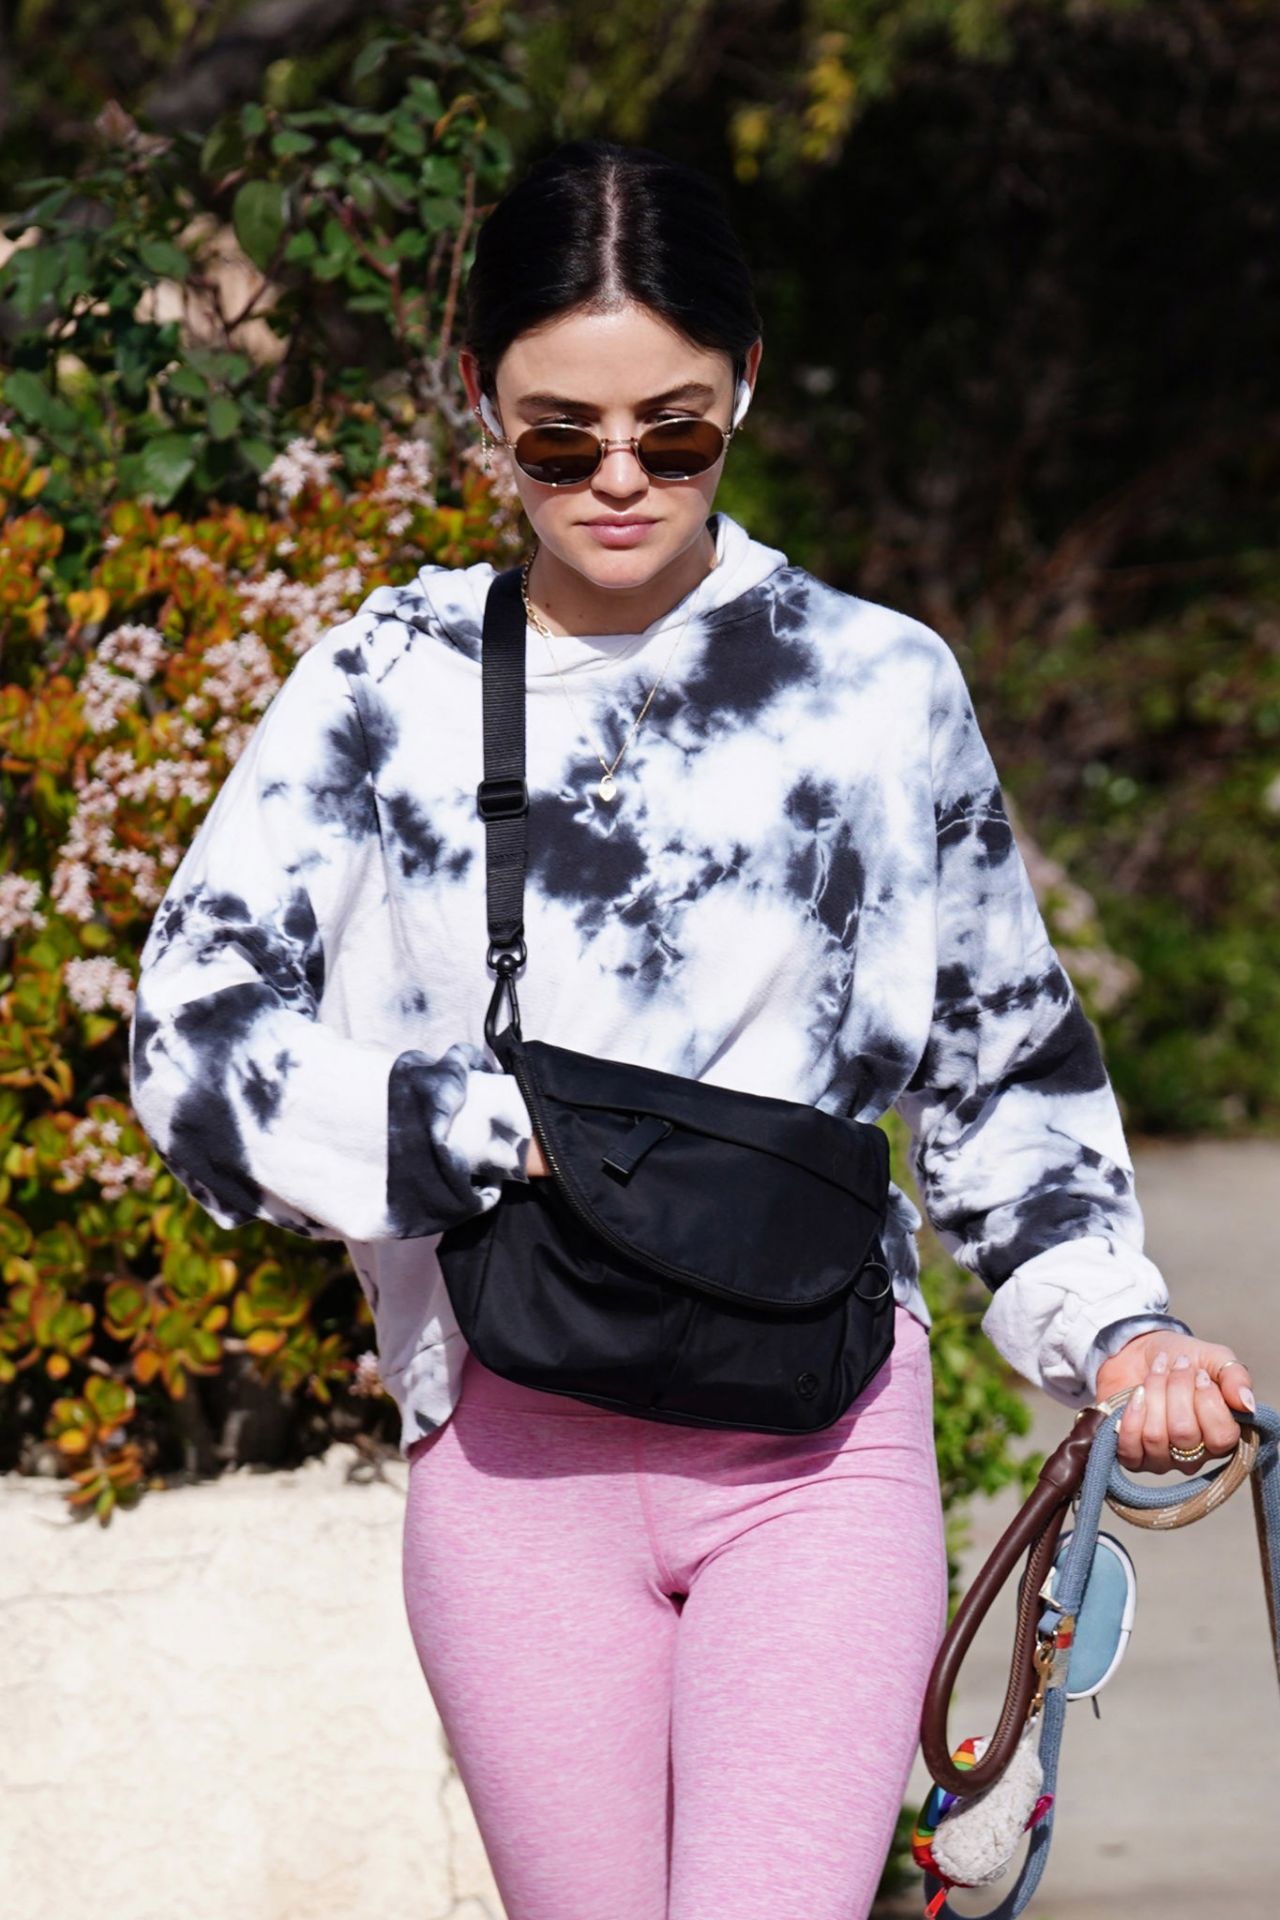 Best Lucy Hale Goes Braless On A Grocery Run To Erewhon